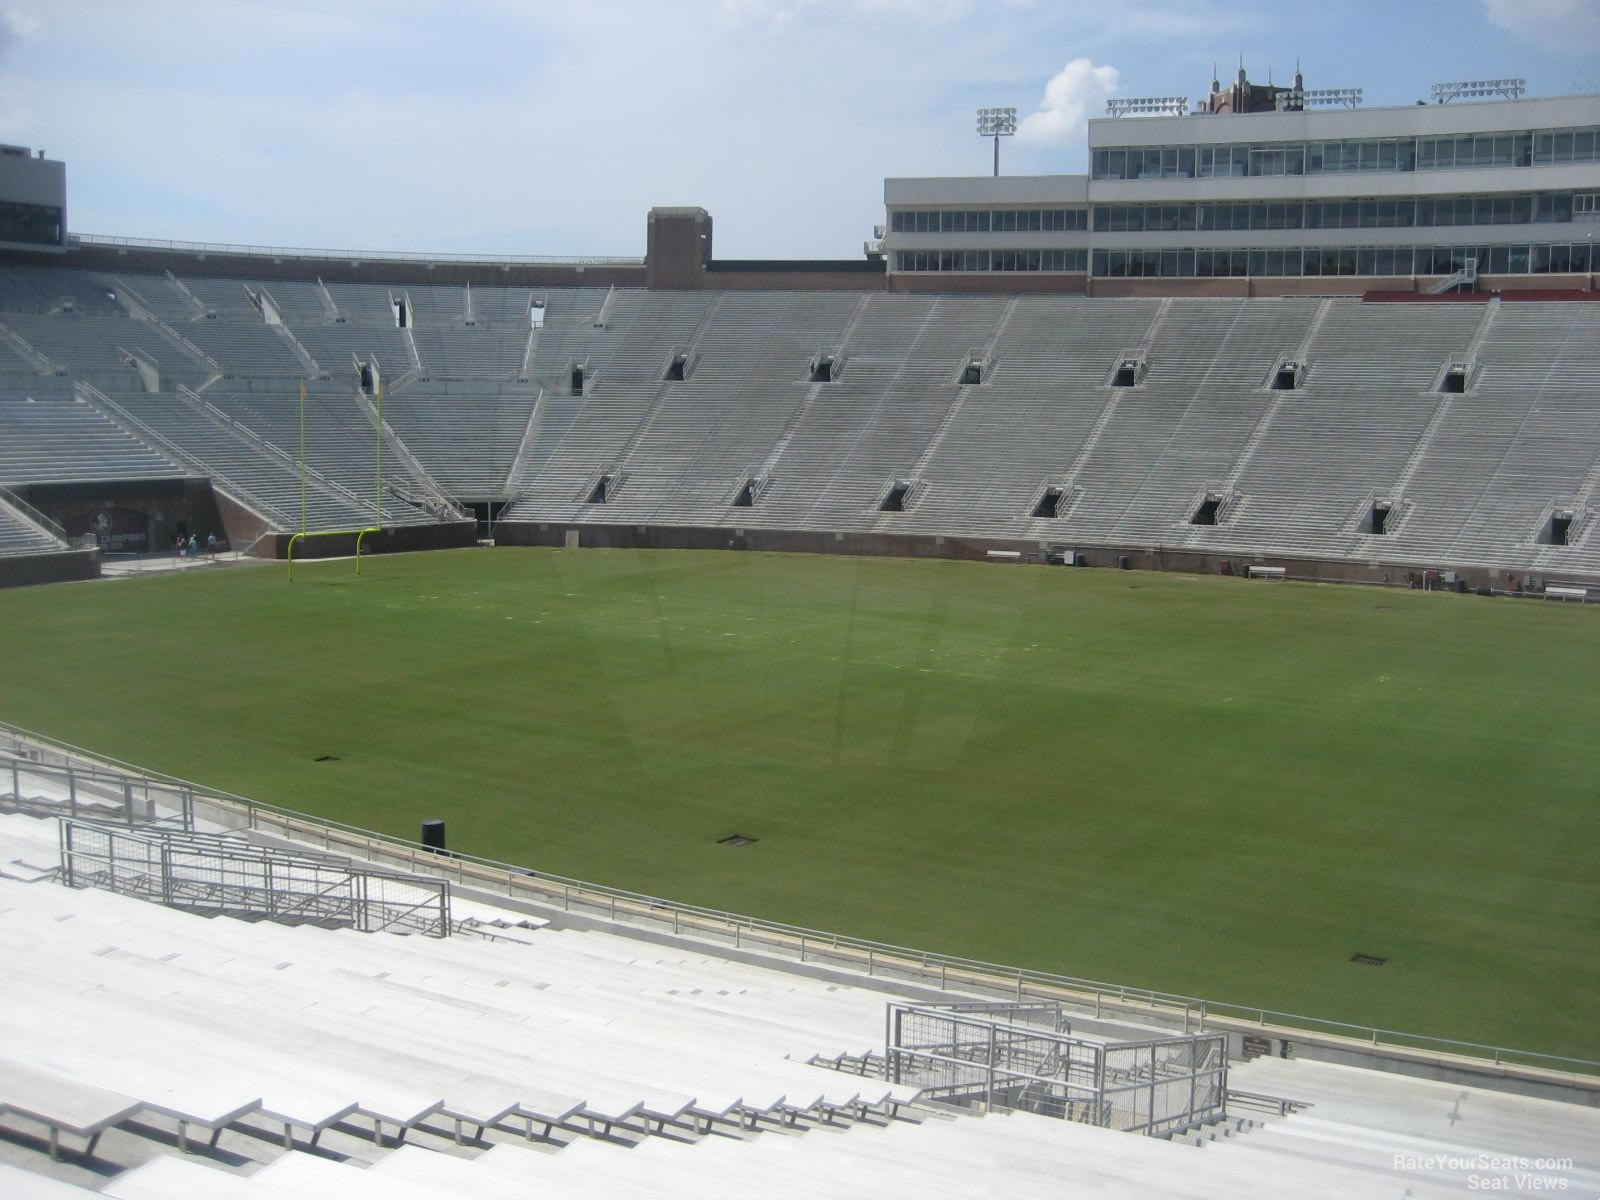 section 8, row 41 seat view  - doak campbell stadium